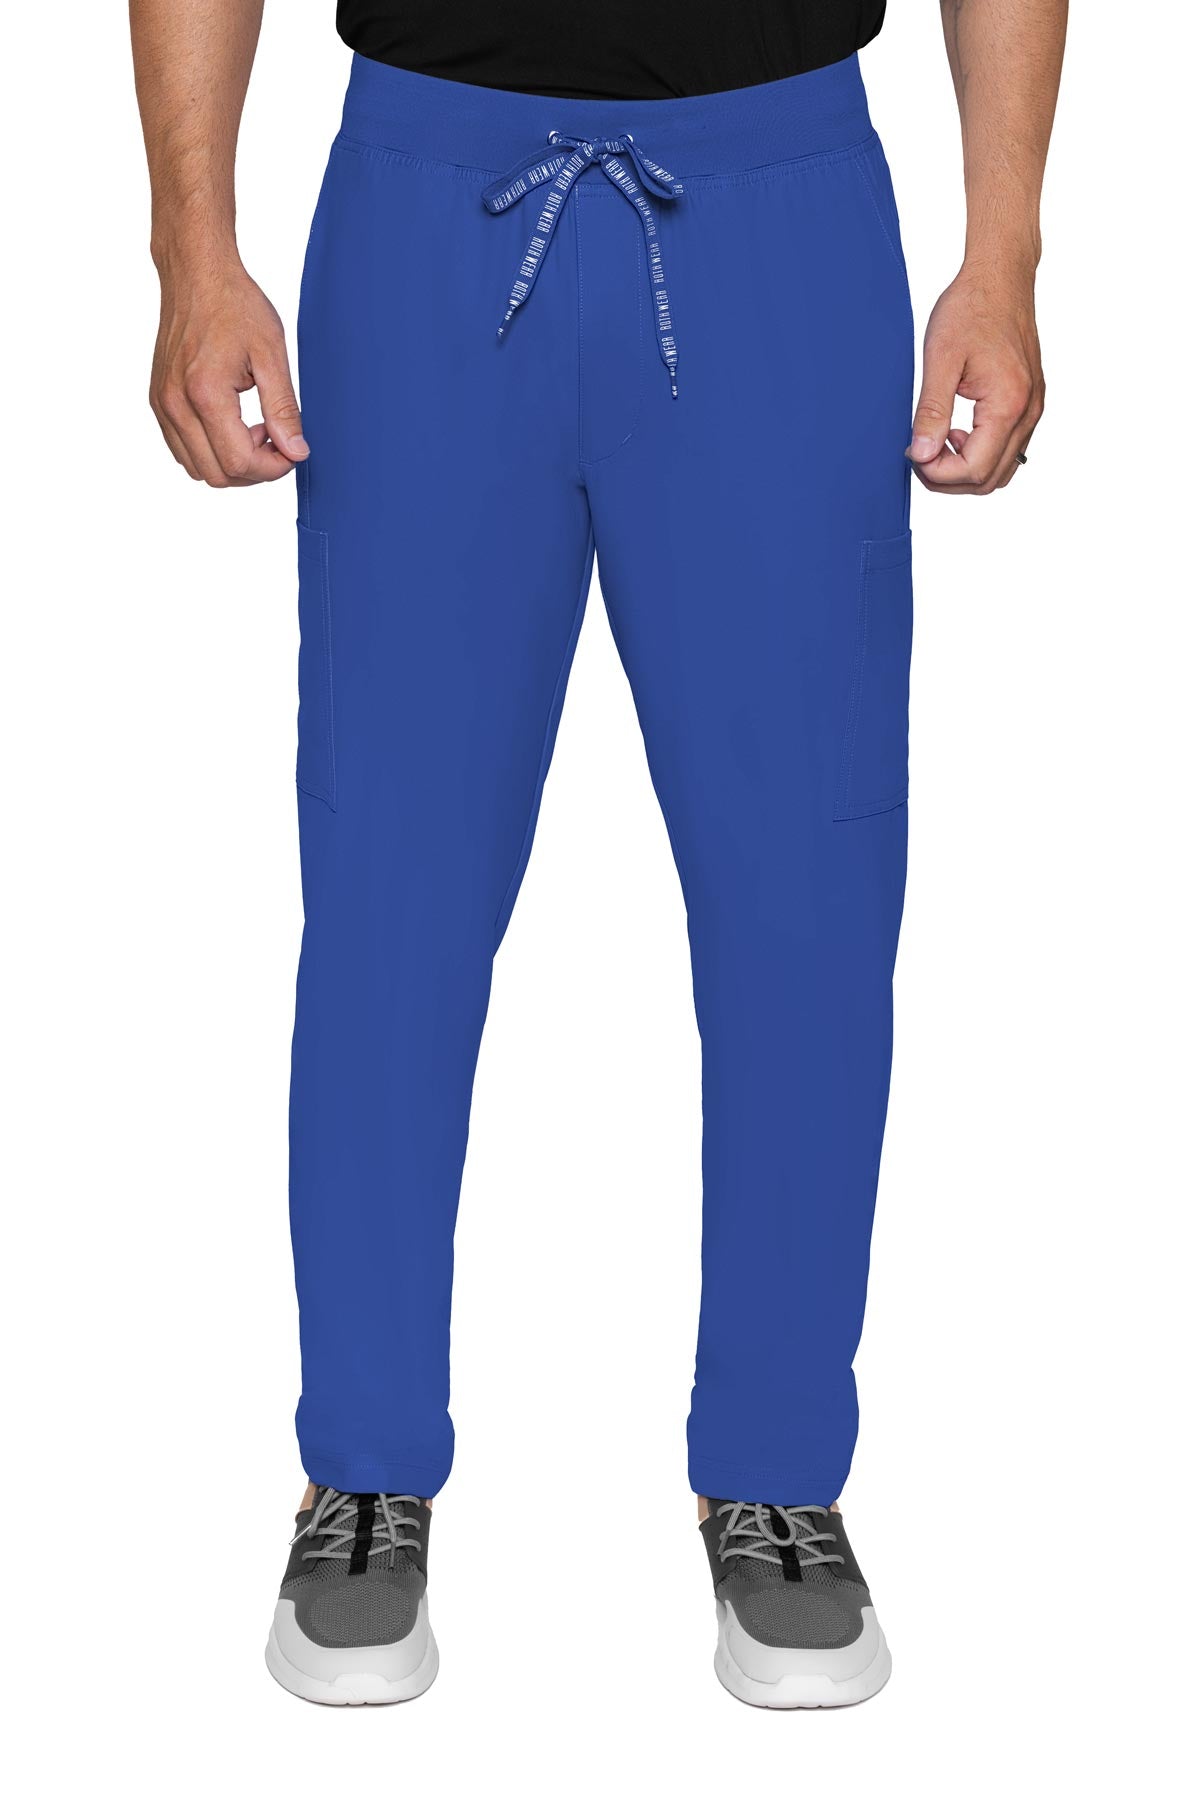 Med Couture Mens Scrub Pants RothWear Insight in royal at Parker's Clothing and Shoes.